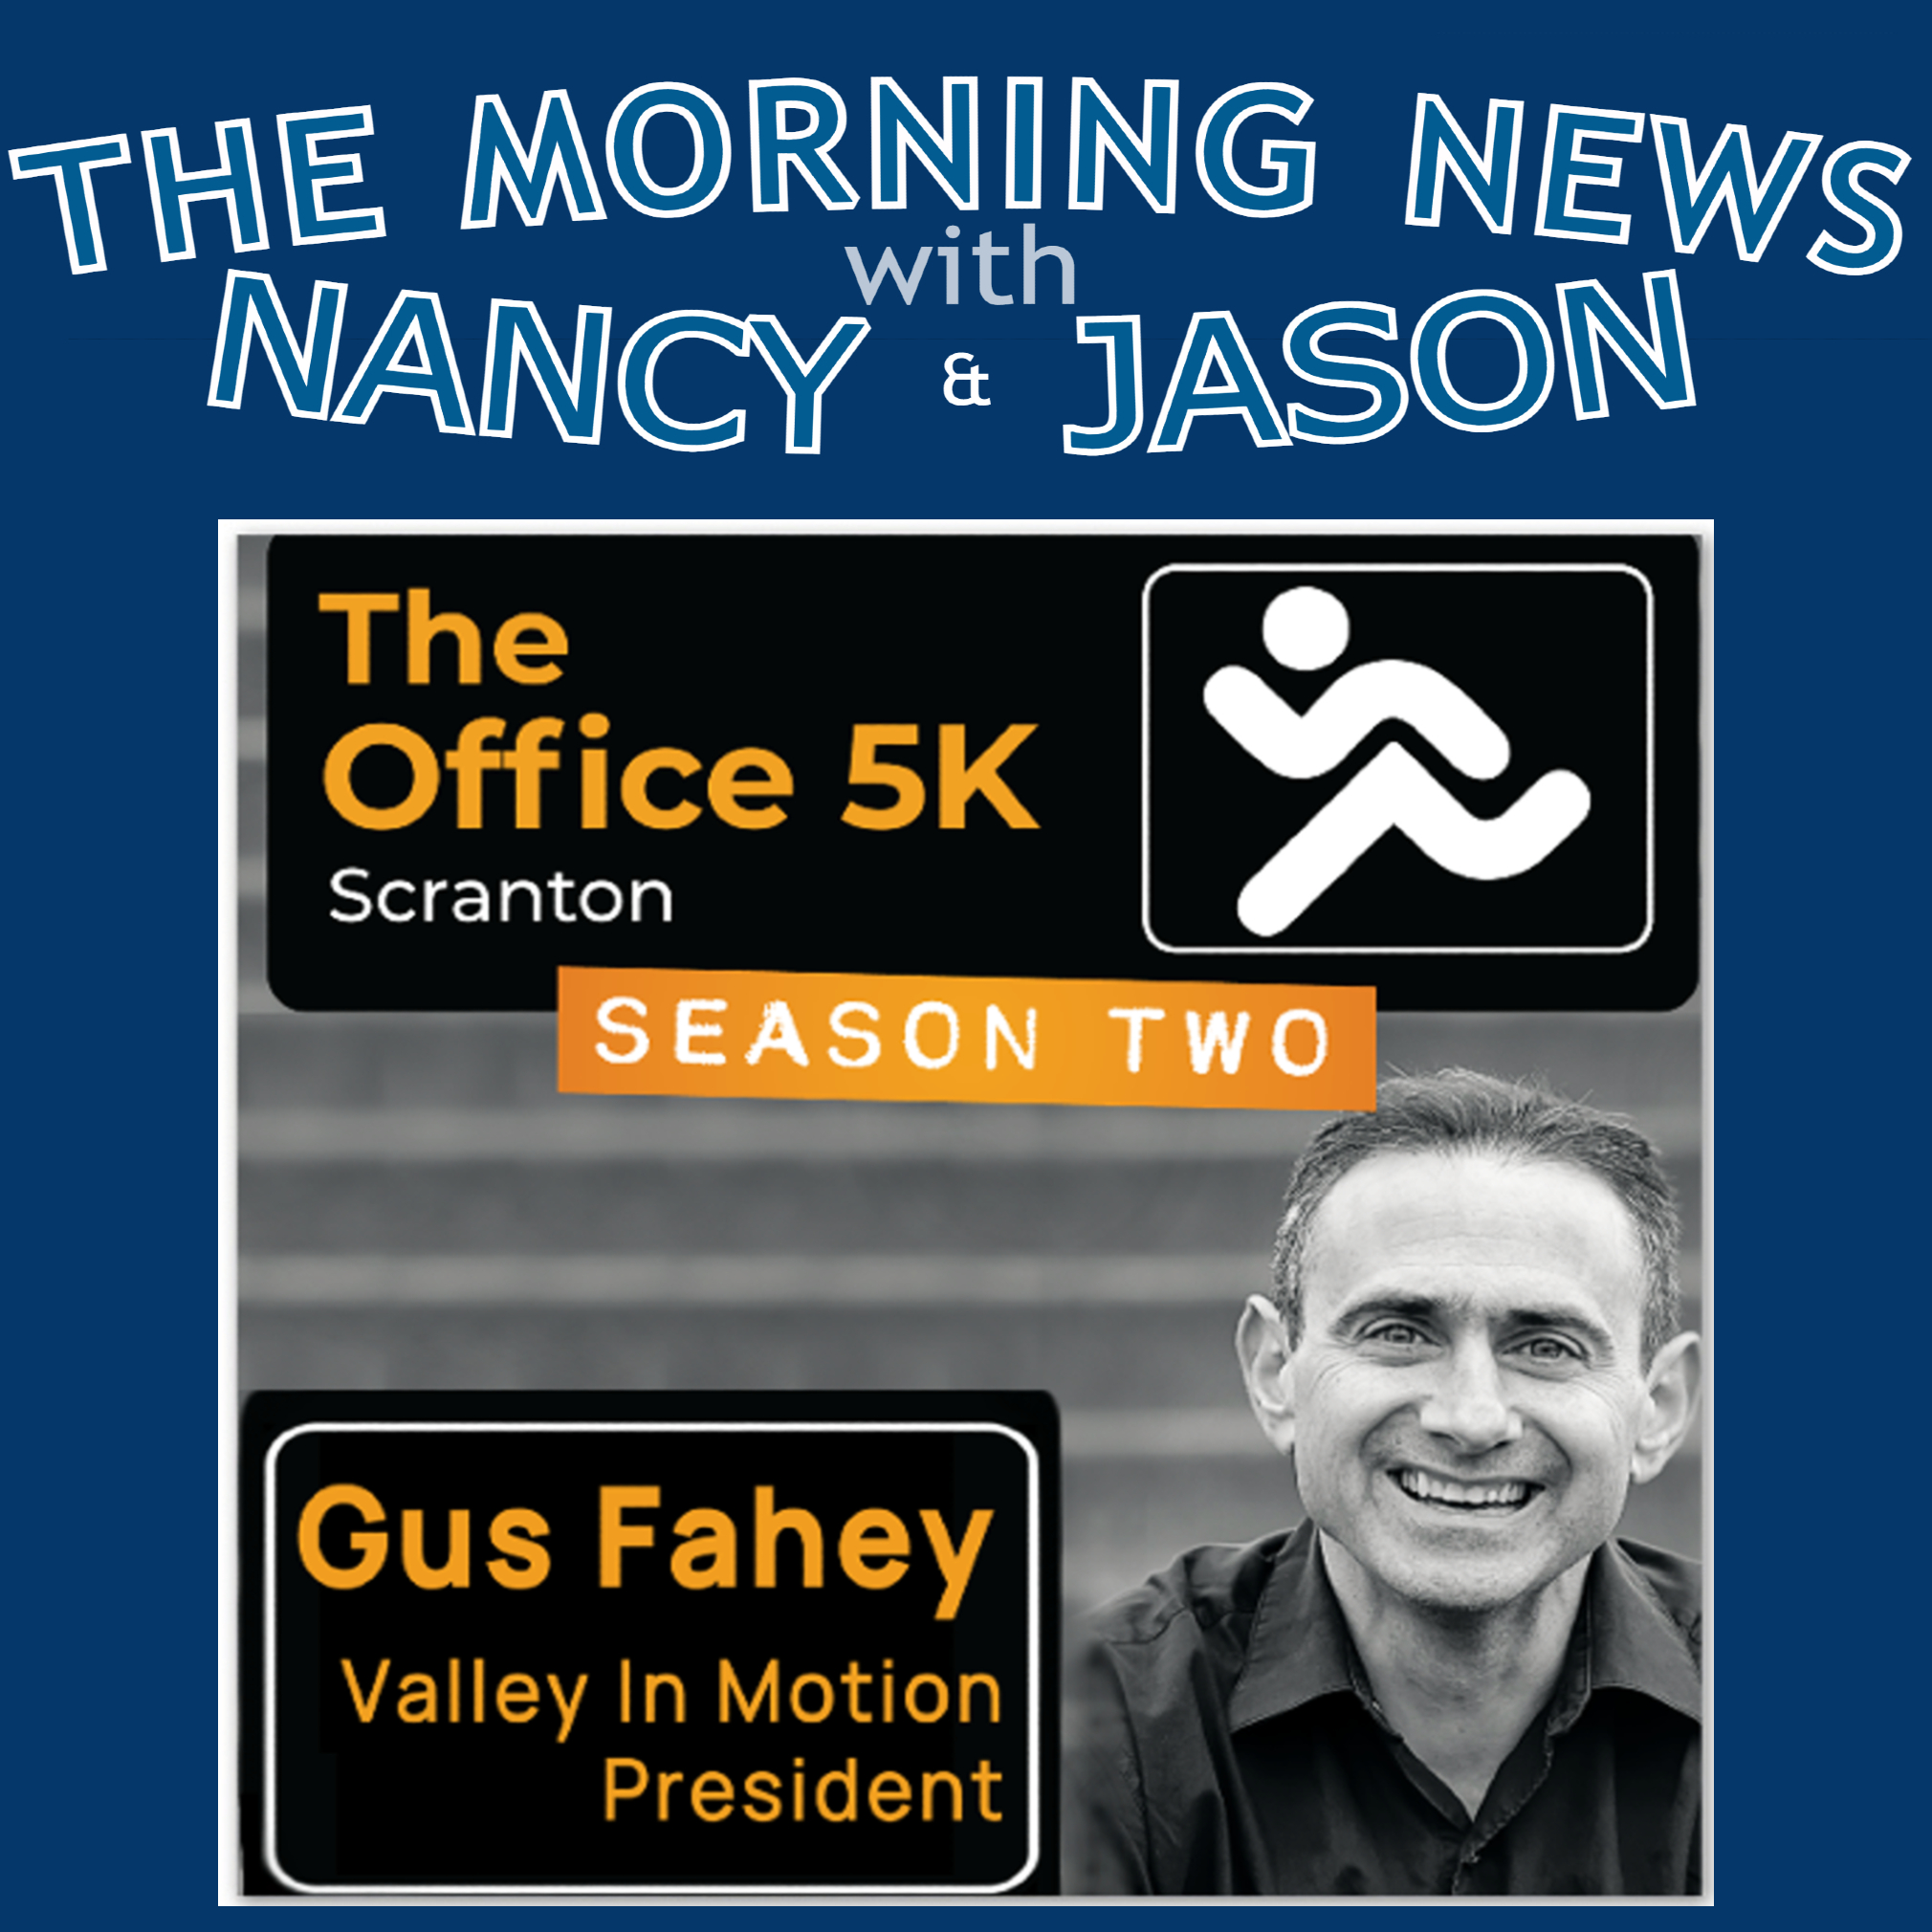 Valley In Motion President, Gus Fahey joins Jason Barsky to talk about "The Office 5K"